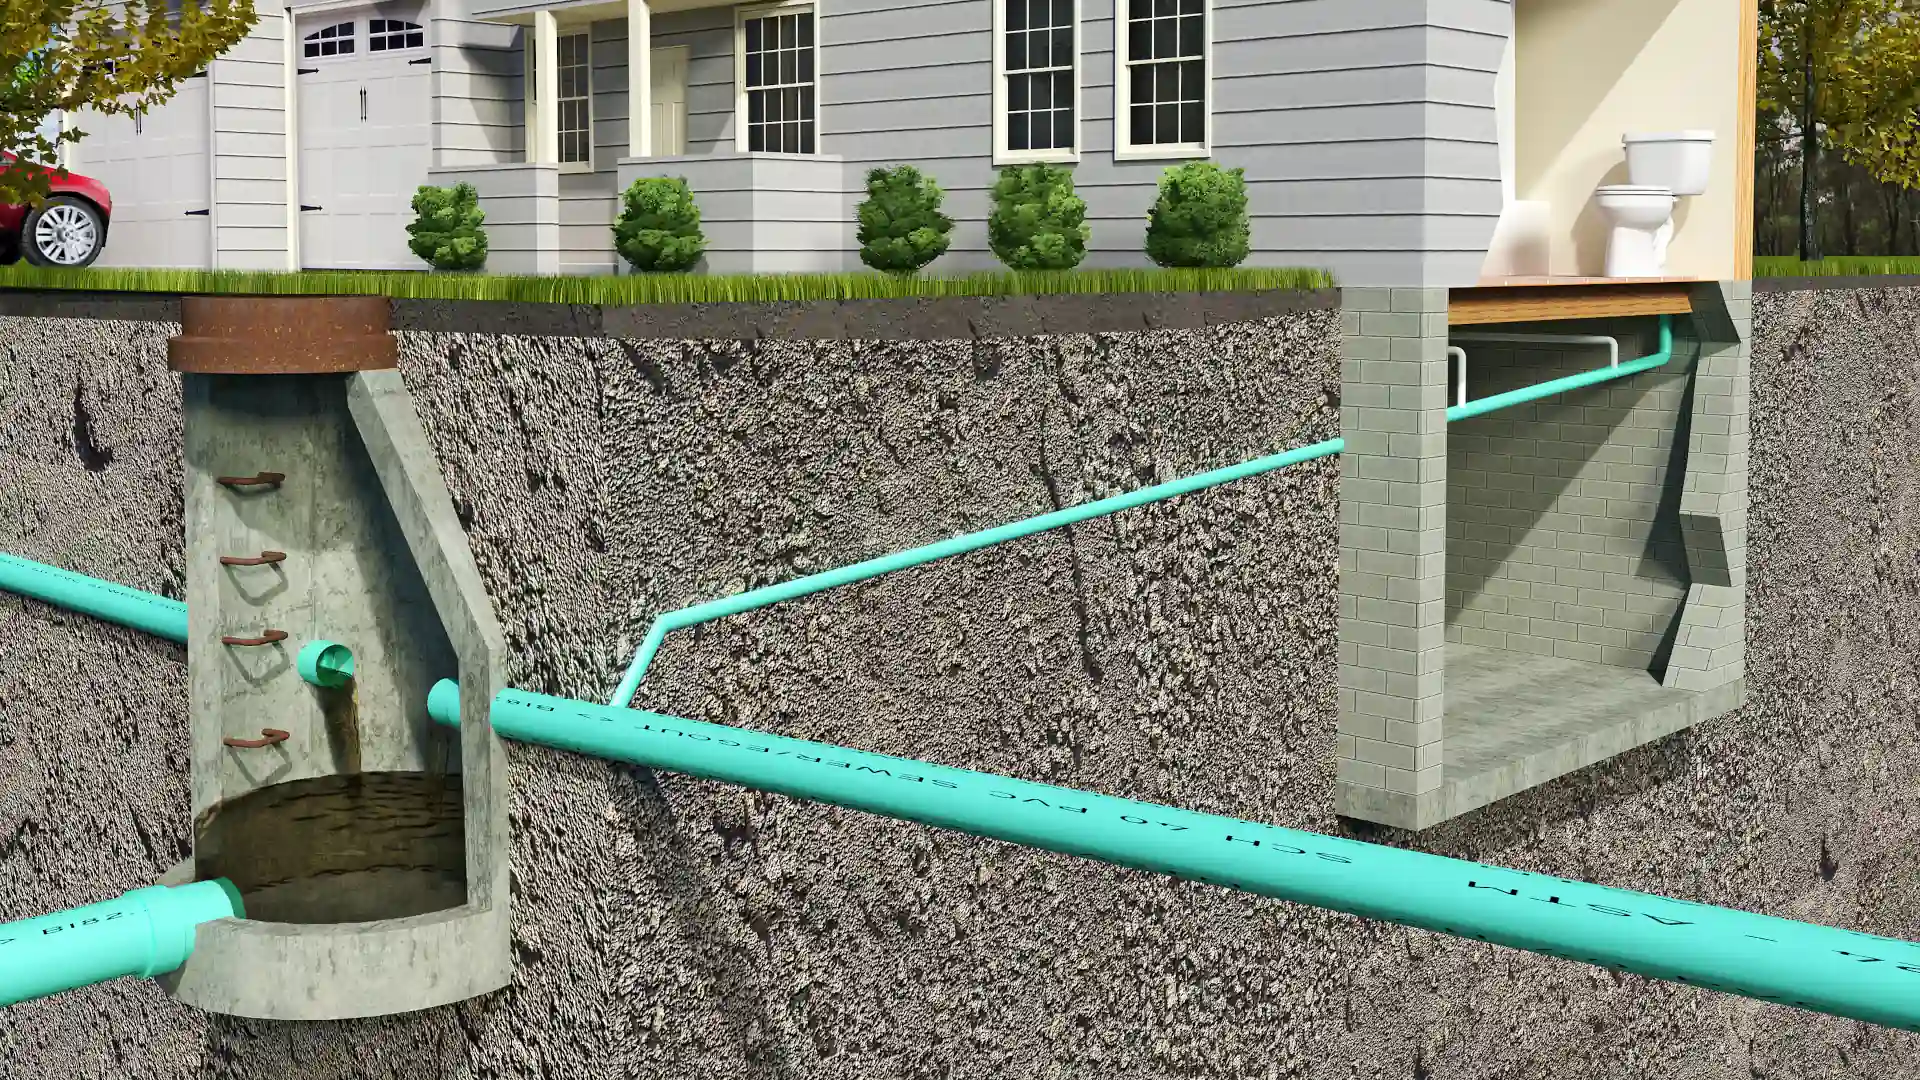 Home drainage system design – residential sewerage system.